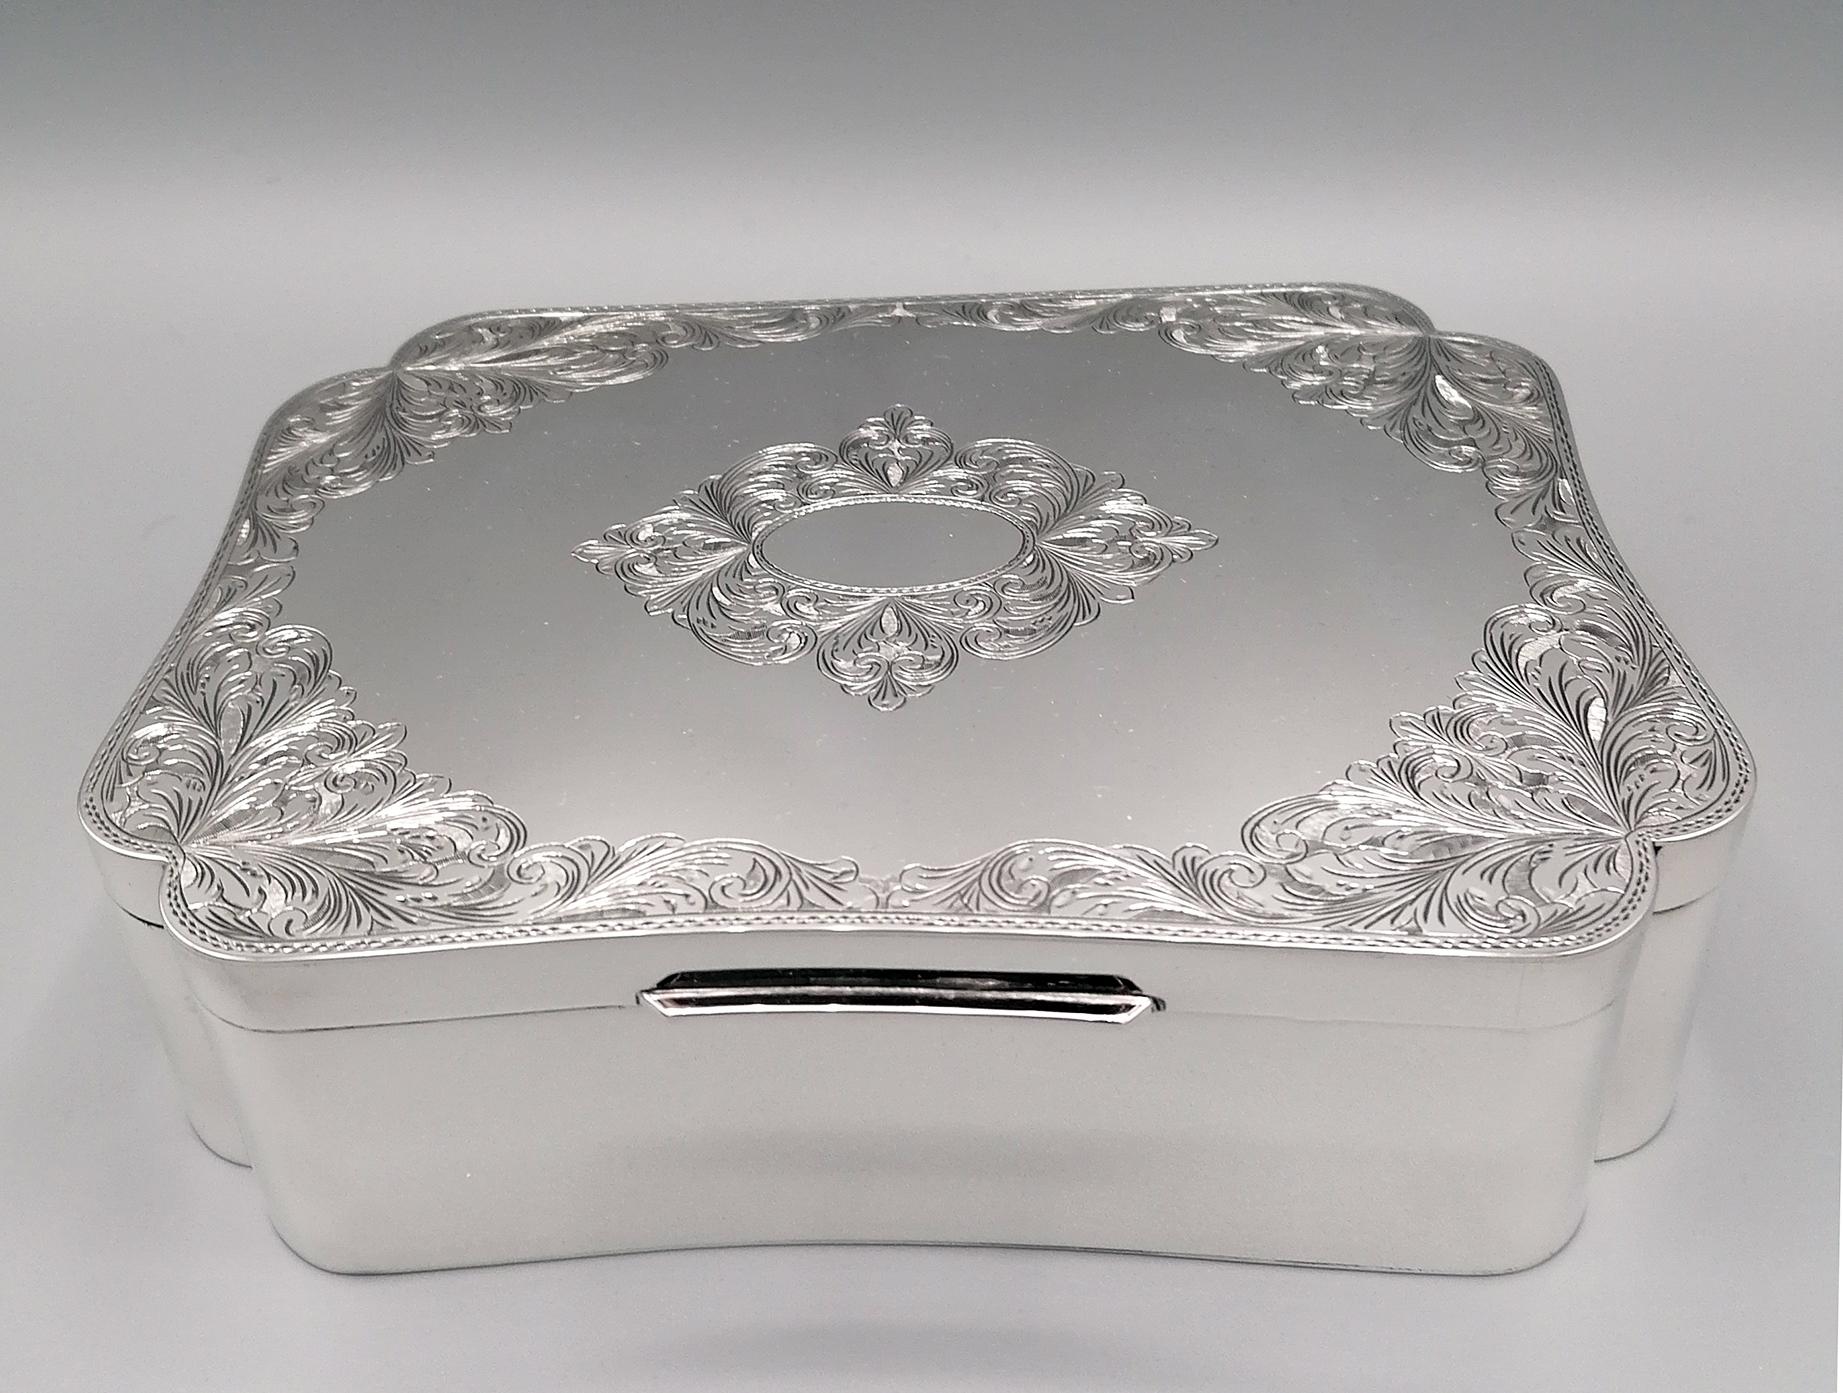 Jewelry box in 925 sterling silver. The body of the box is rectangular and shaped which makes its line light and harmonious. The hinged lid is hand-engraved with volutes and Florentine lilies which embellish its shape. In the center of the box,